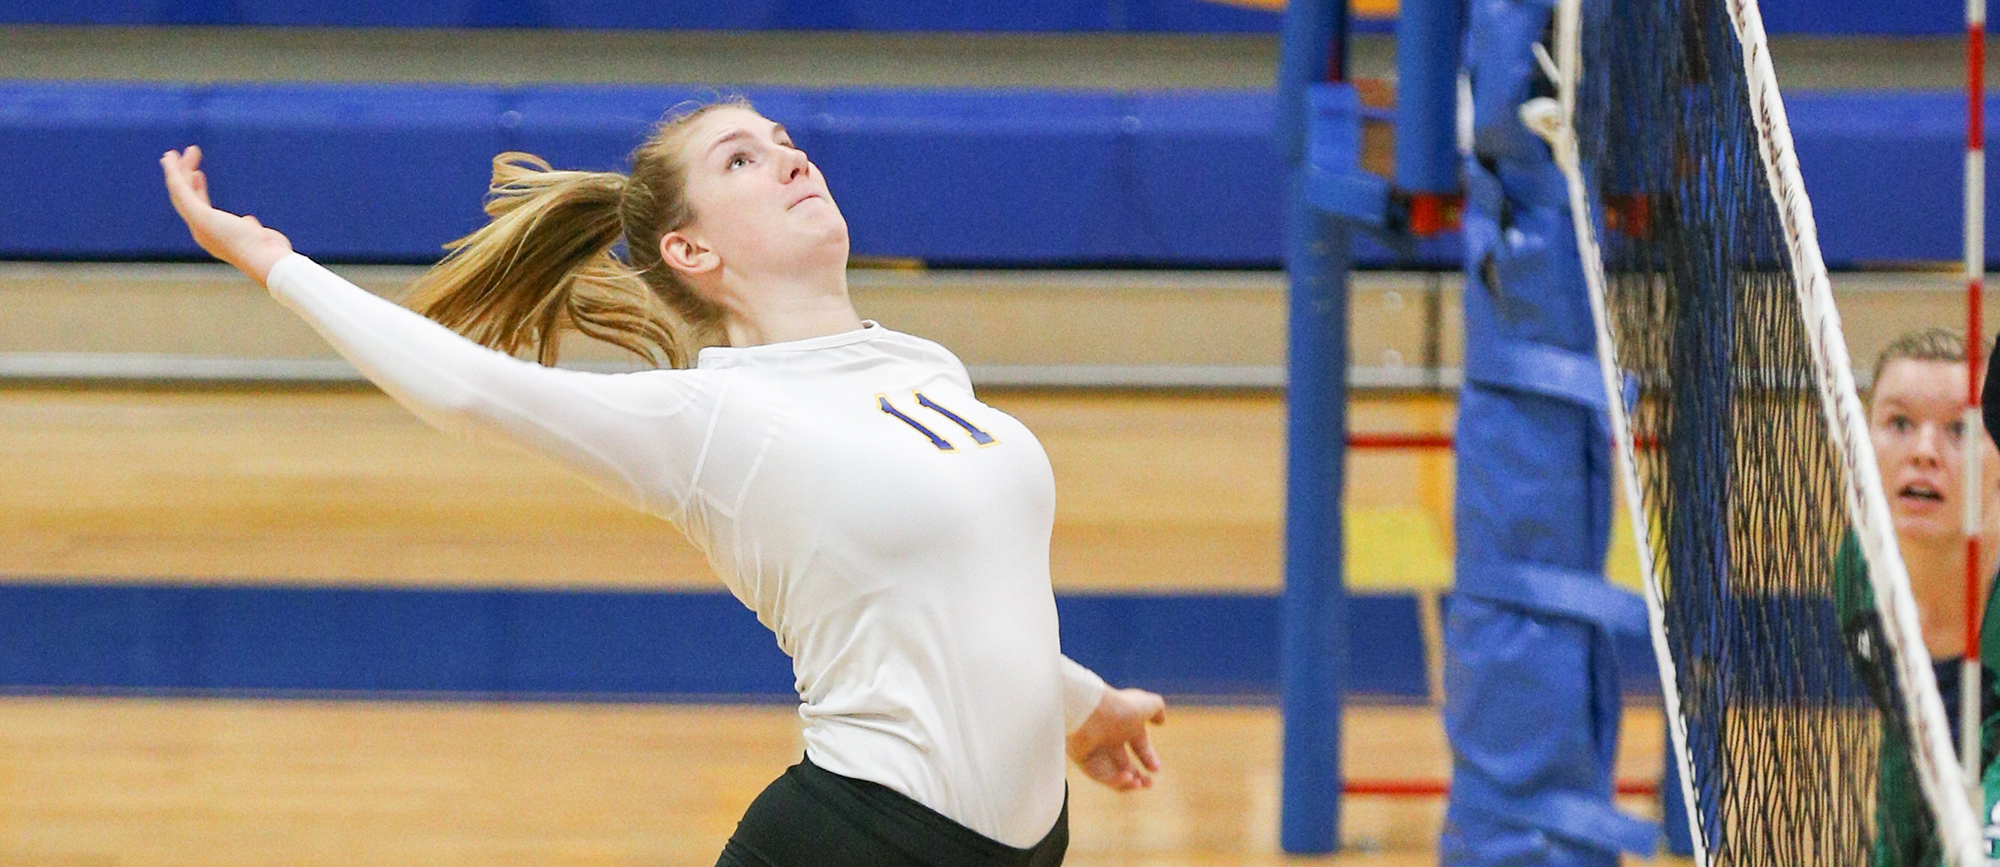 Junior Cassie Holmes recorded a team-high 14 kills in Western New England's five-set loss to Gordon on Tuesday. (Photo by Chris Marion)